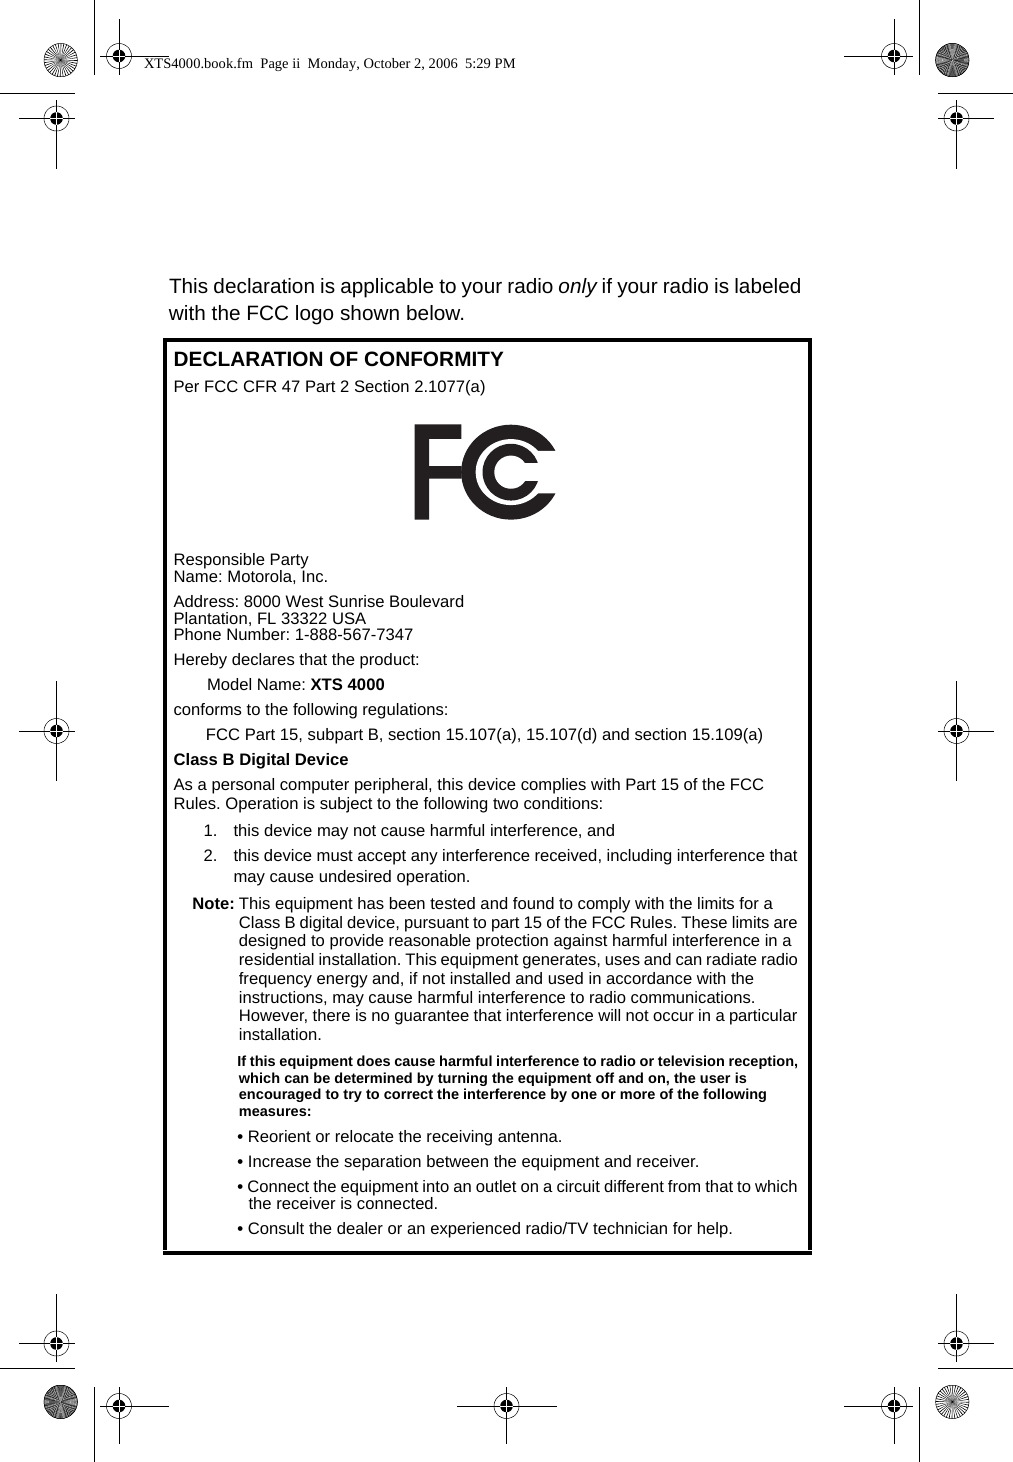 This declaration is applicable to your radio only if your radio is labeled with the FCC logo shown below.DECLARATION OF CONFORMITYPer FCC CFR 47 Part 2 Section 2.1077(a)Responsible Party Name: Motorola, Inc.Address: 8000 West Sunrise BoulevardPlantation, FL 33322 USAPhone Number: 1-888-567-7347Hereby declares that the product:Model Name: XTS 4000conforms to the following regulations:FCC Part 15, subpart B, section 15.107(a), 15.107(d) and section 15.109(a)Class B Digital DeviceAs a personal computer peripheral, this device complies with Part 15 of the FCC Rules. Operation is subject to the following two conditions:1. this device may not cause harmful interference, and 2. this device must accept any interference received, including interference that may cause undesired operation.Note: This equipment has been tested and found to comply with the limits for a Class B digital device, pursuant to part 15 of the FCC Rules. These limits are designed to provide reasonable protection against harmful interference in a residential installation. This equipment generates, uses and can radiate radio frequency energy and, if not installed and used in accordance with the instructions, may cause harmful interference to radio communications. However, there is no guarantee that interference will not occur in a particular installation. If this equipment does cause harmful interference to radio or television reception, which can be determined by turning the equipment off and on, the user is encouraged to try to correct the interference by one or more of the following measures:• Reorient or relocate the receiving antenna.• Increase the separation between the equipment and receiver.• Connect the equipment into an outlet on a circuit different from that to which the receiver is connected.• Consult the dealer or an experienced radio/TV technician for help.XTS4000.book.fm  Page ii  Monday, October 2, 2006  5:29 PM